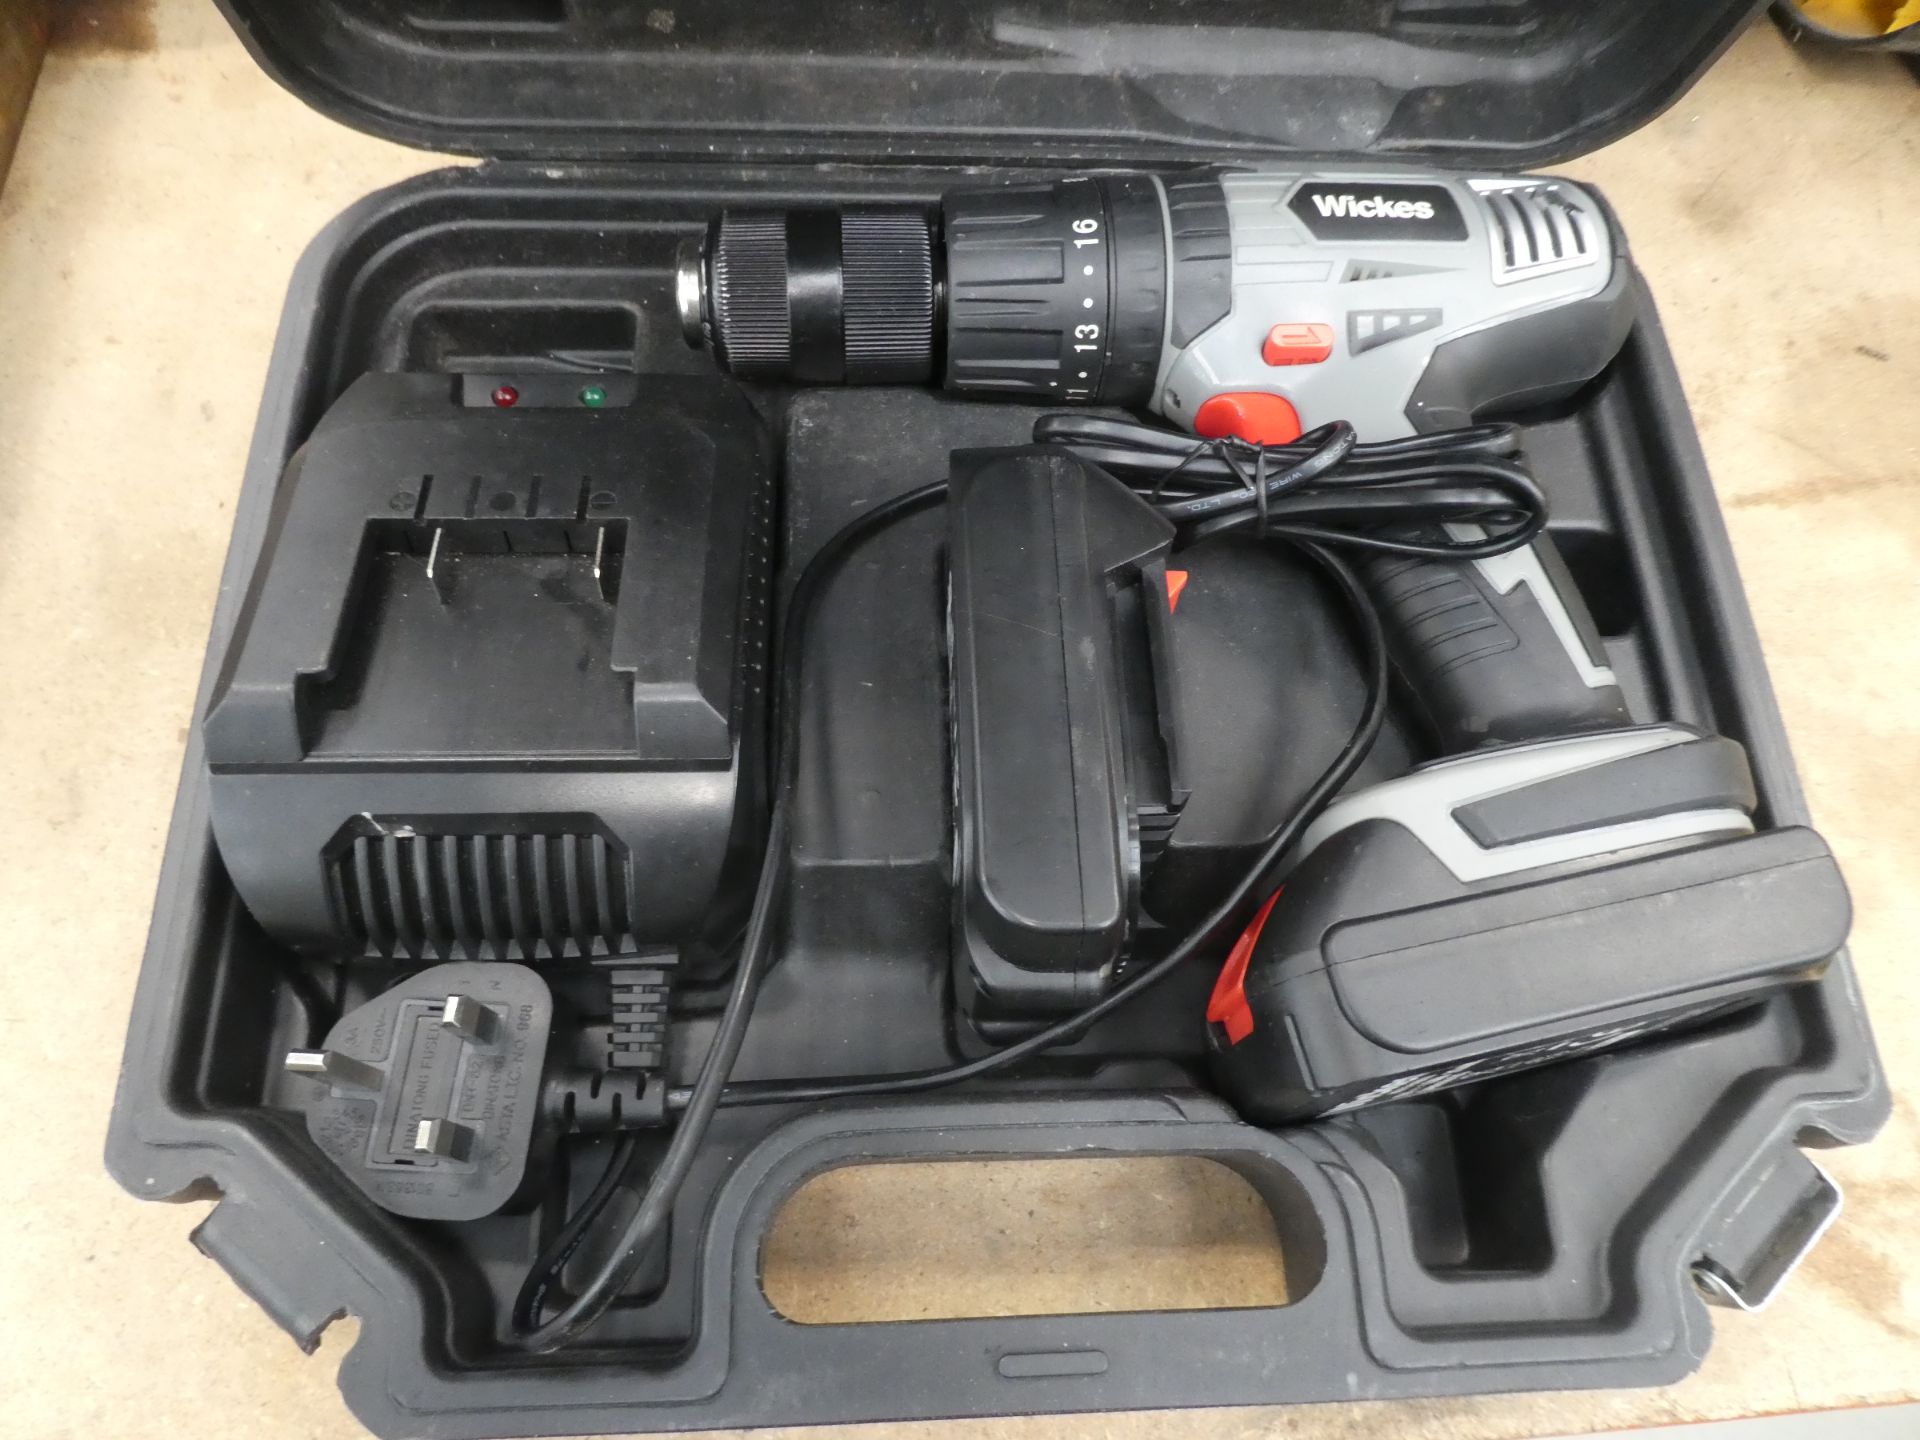 Wickes battery drill with 1 battery and charger